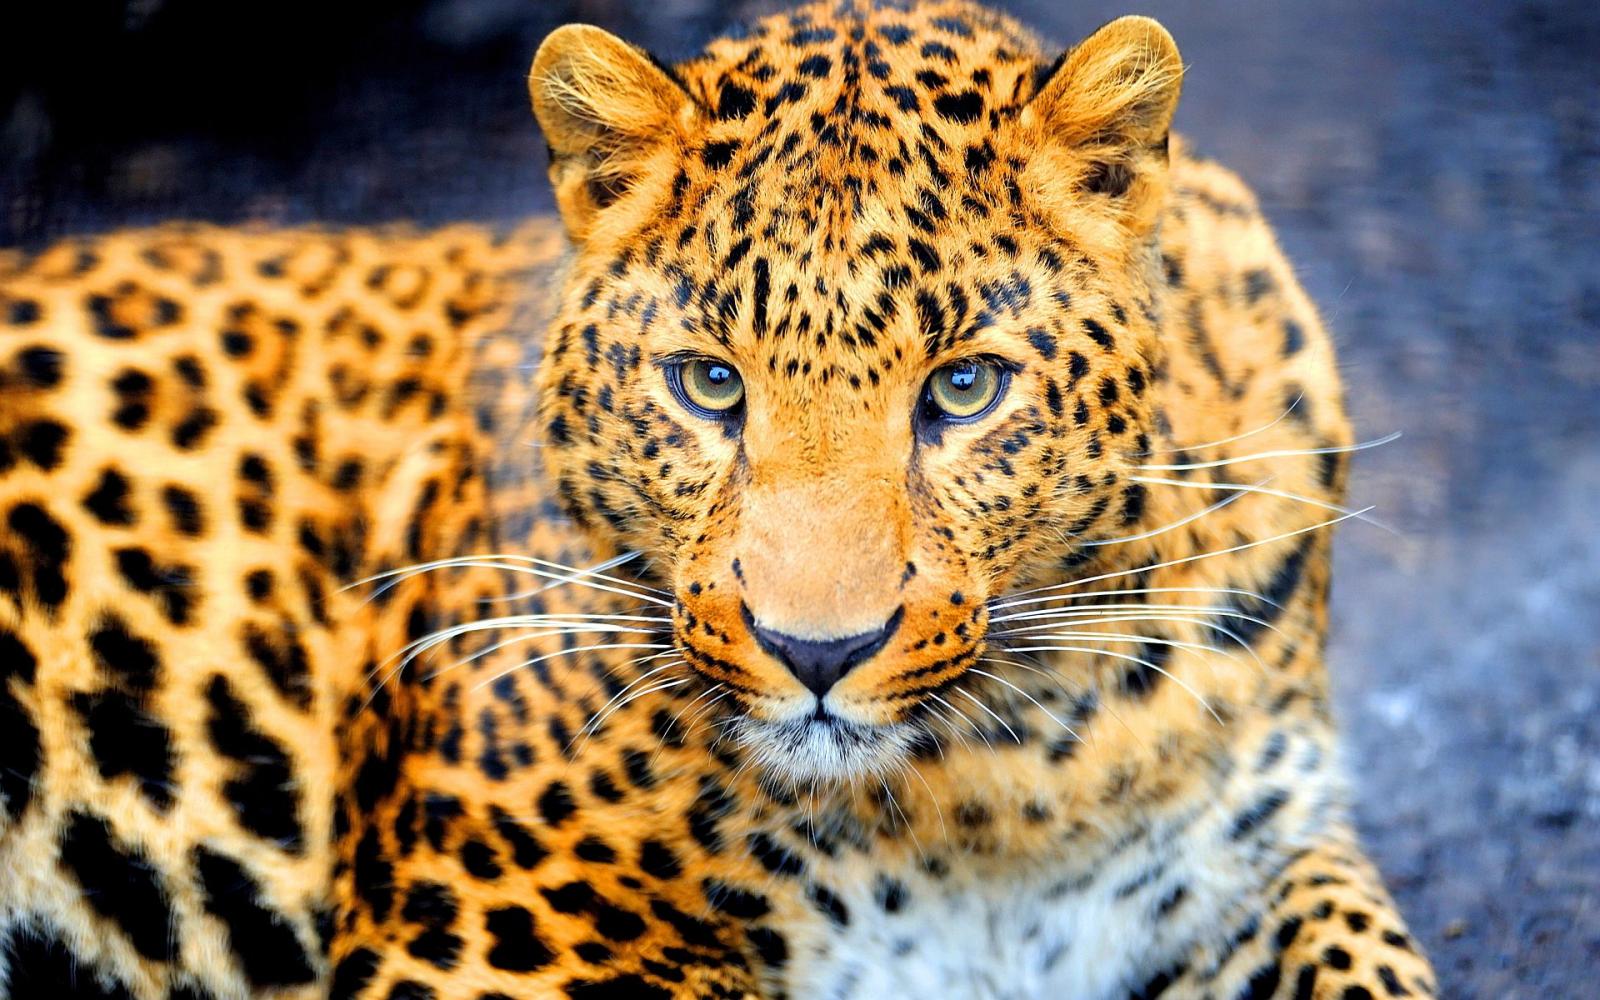 Can You Identify at Least 30/40 of These 🐯 Wild Cat Species 🦁? Jaguar Large Cat